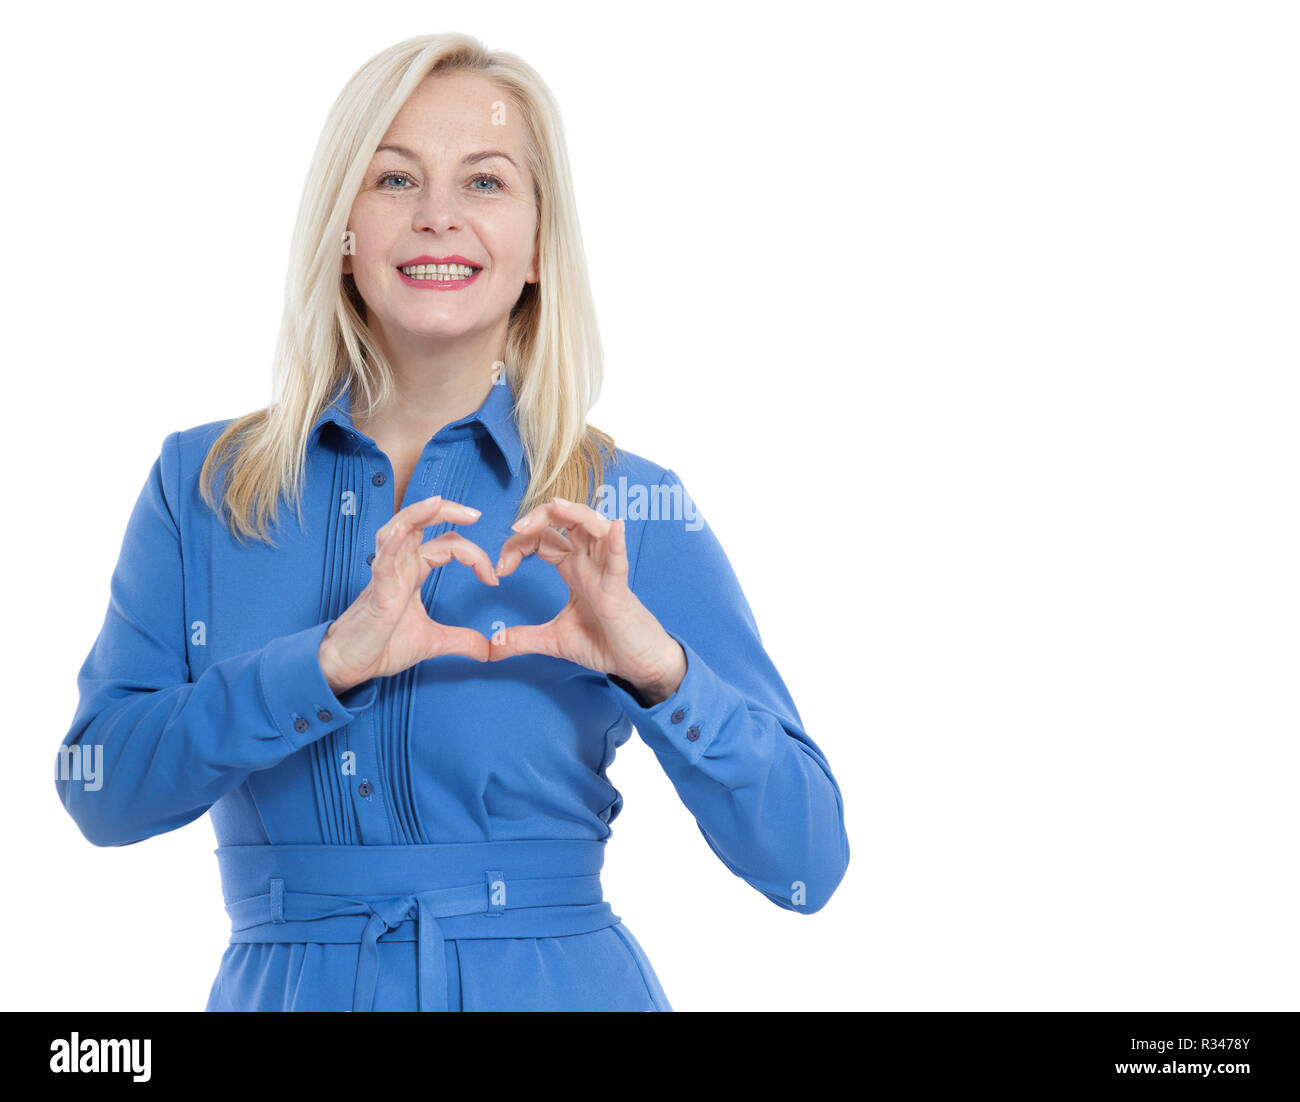 Friendly smiling middle aged woman in blue dress looks at the camera and shows a gesture I love you isolated on white background. Stock Photo